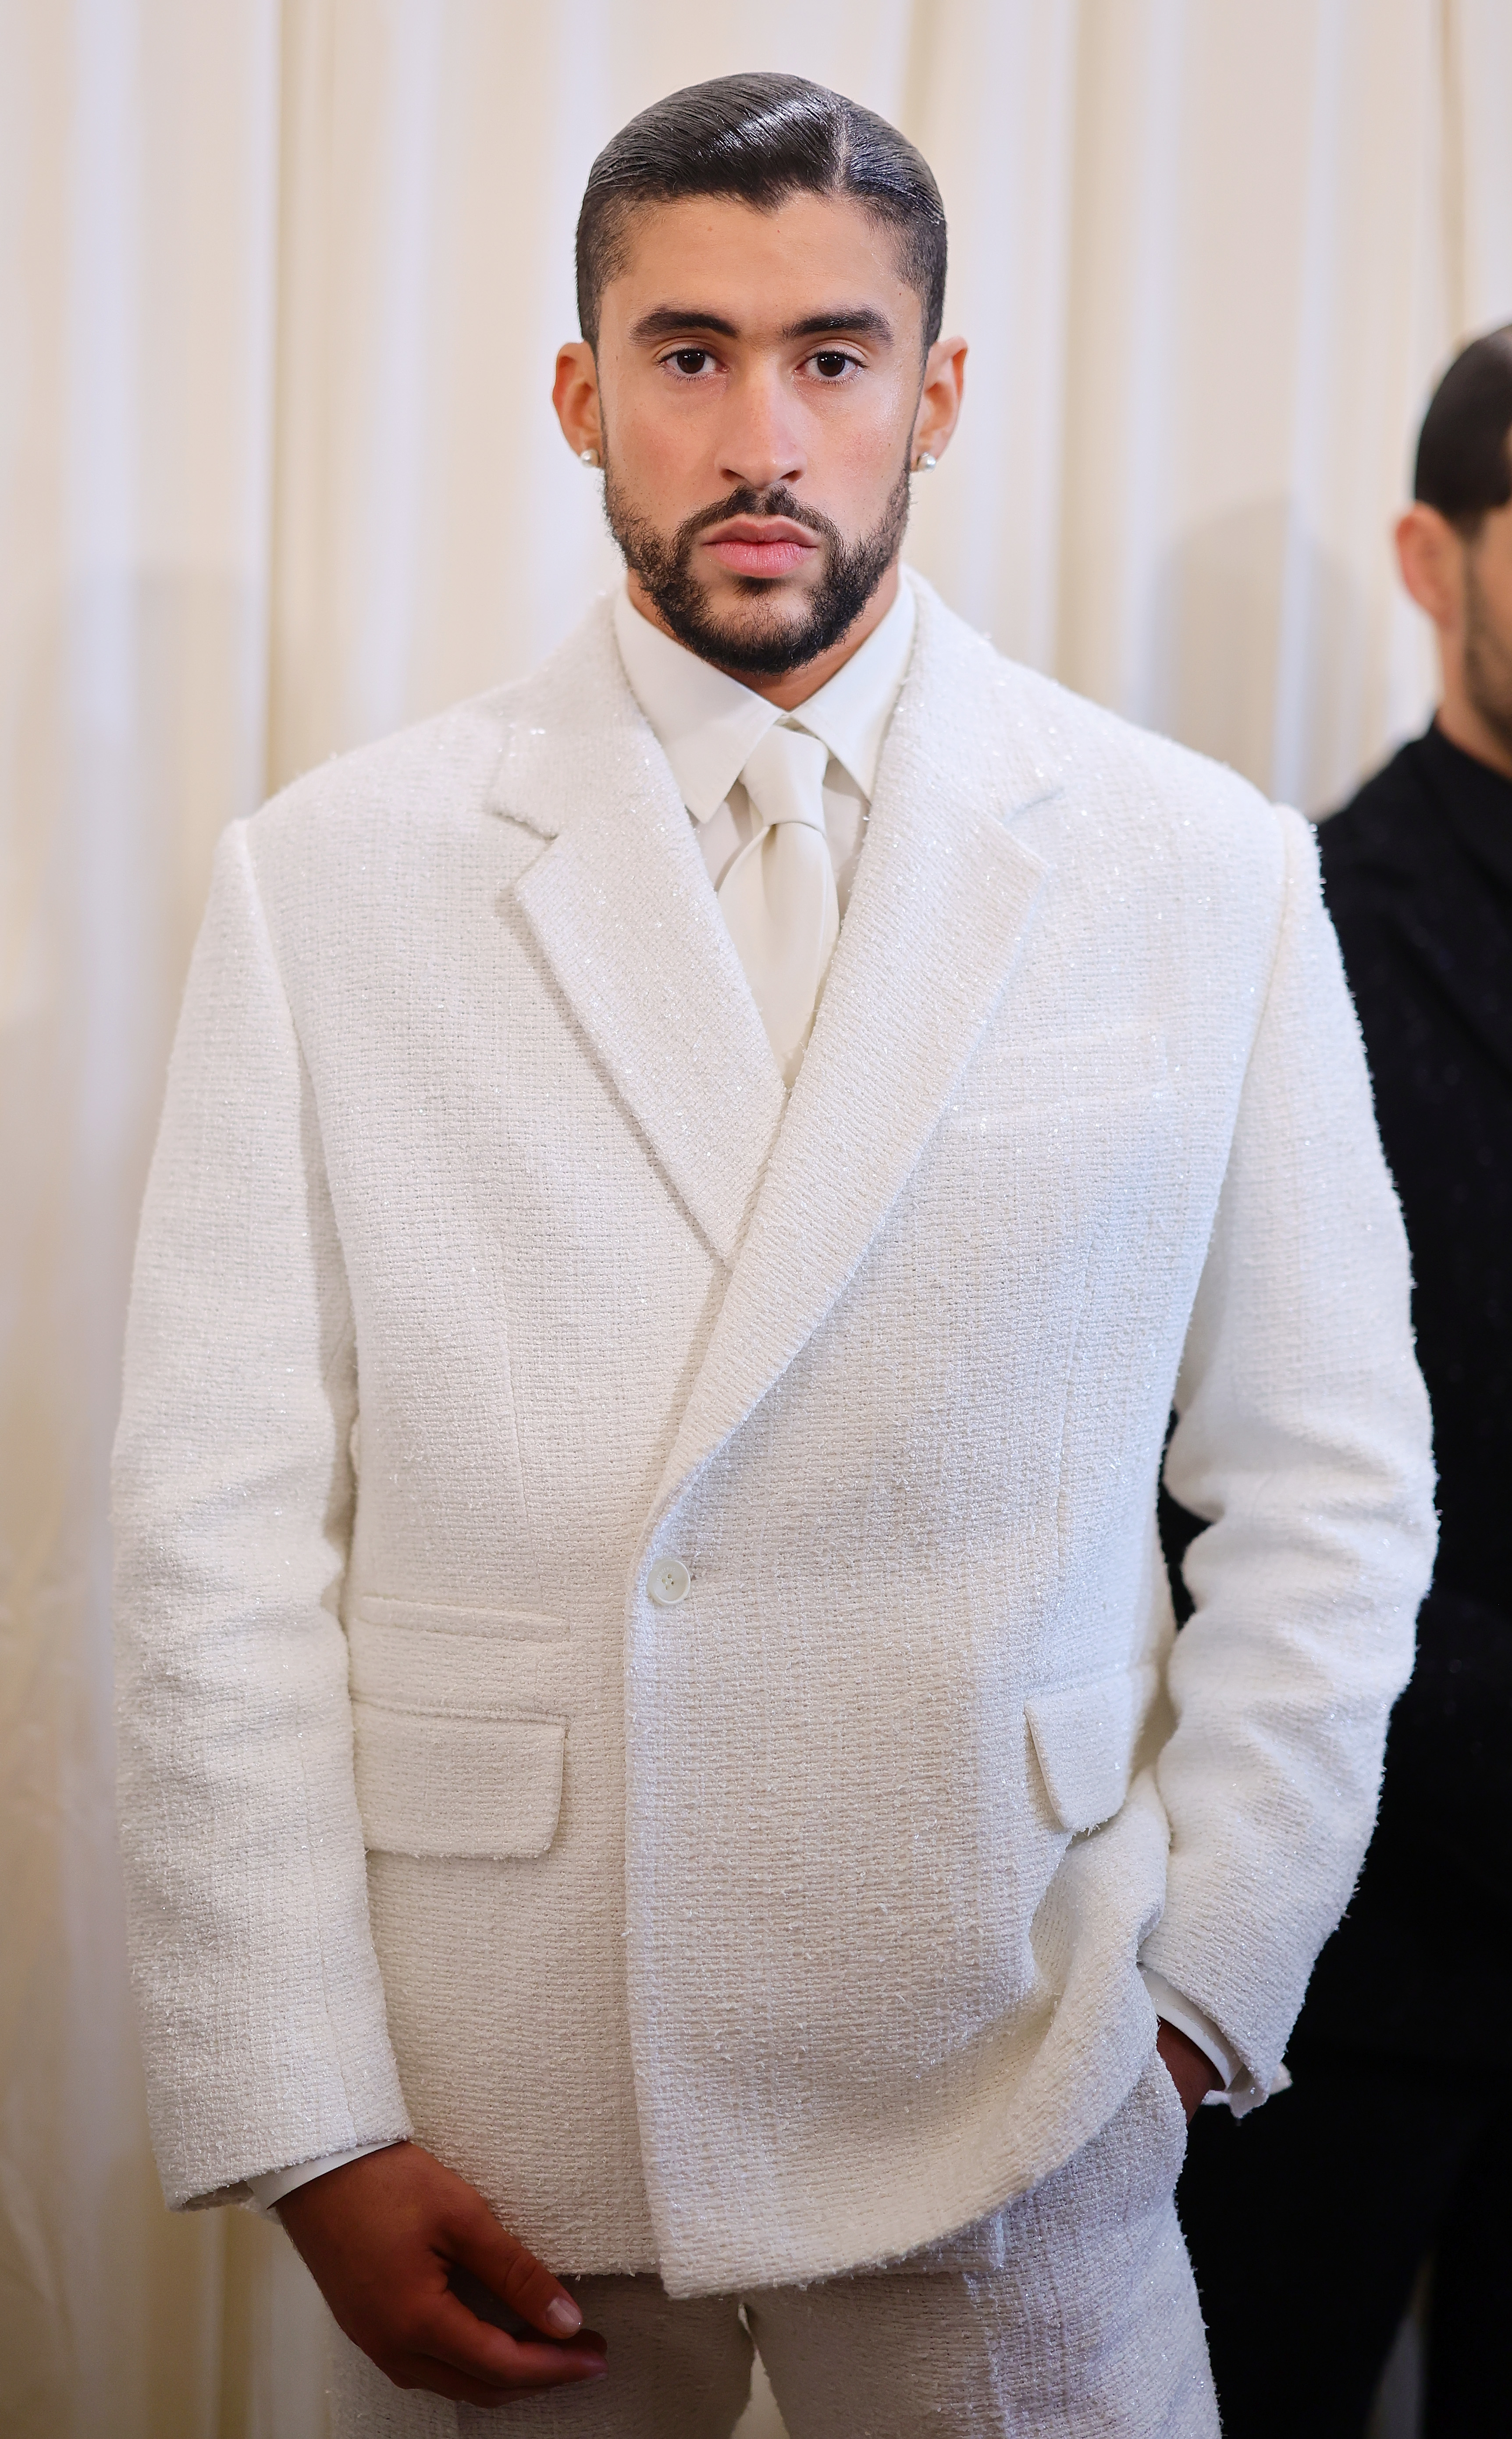 Bad Bunny in a textured suit with a matching tie, standing indoors